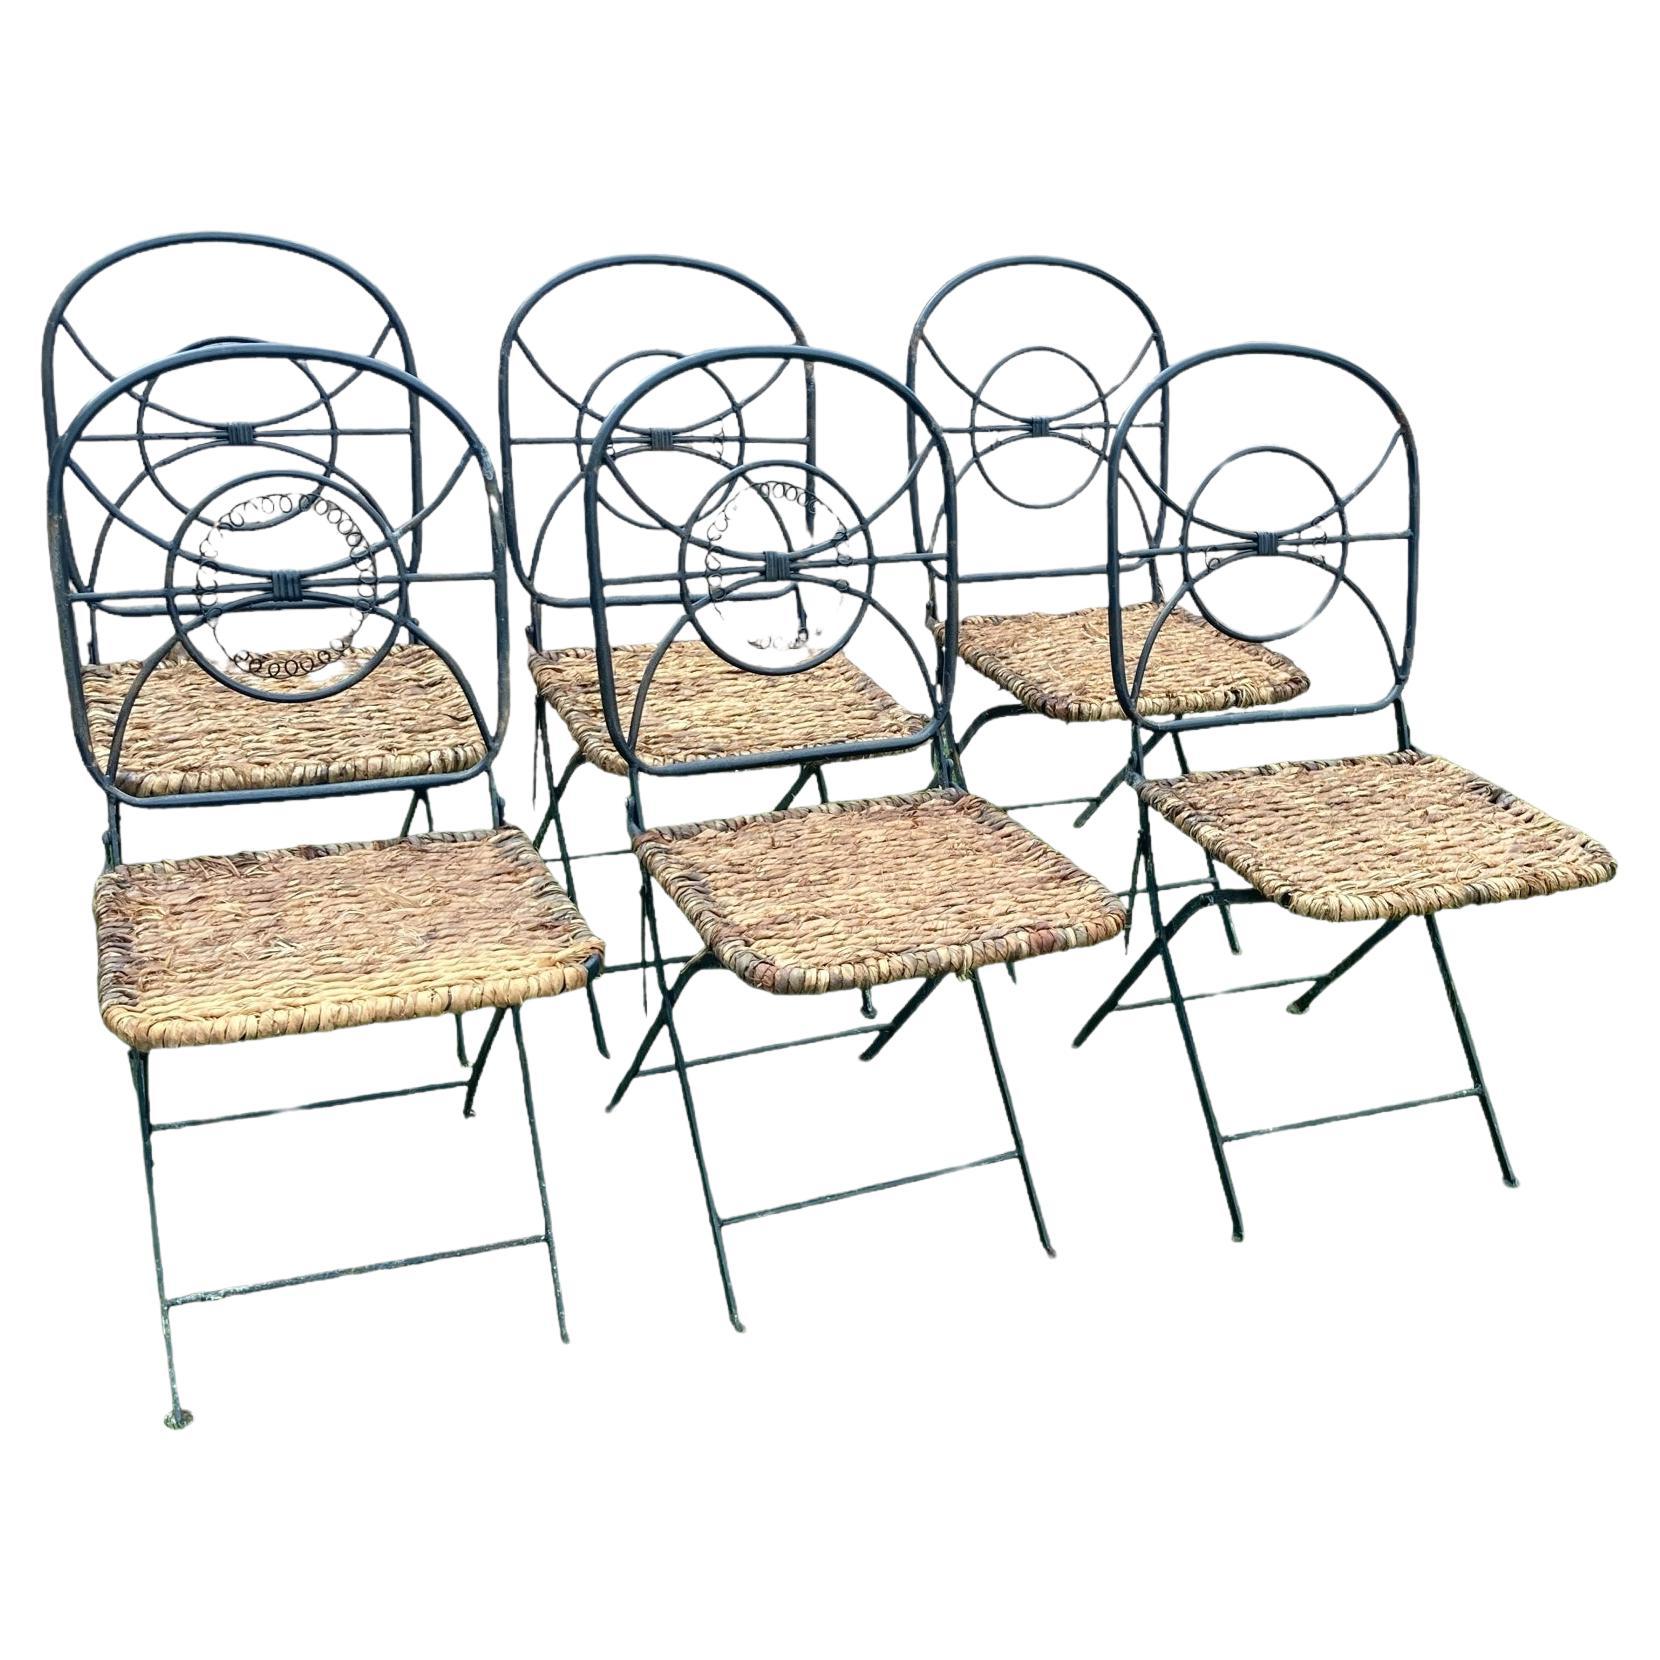 Set of 6 Vintage Folding Wrought Iron and Wicker Garden Chairs